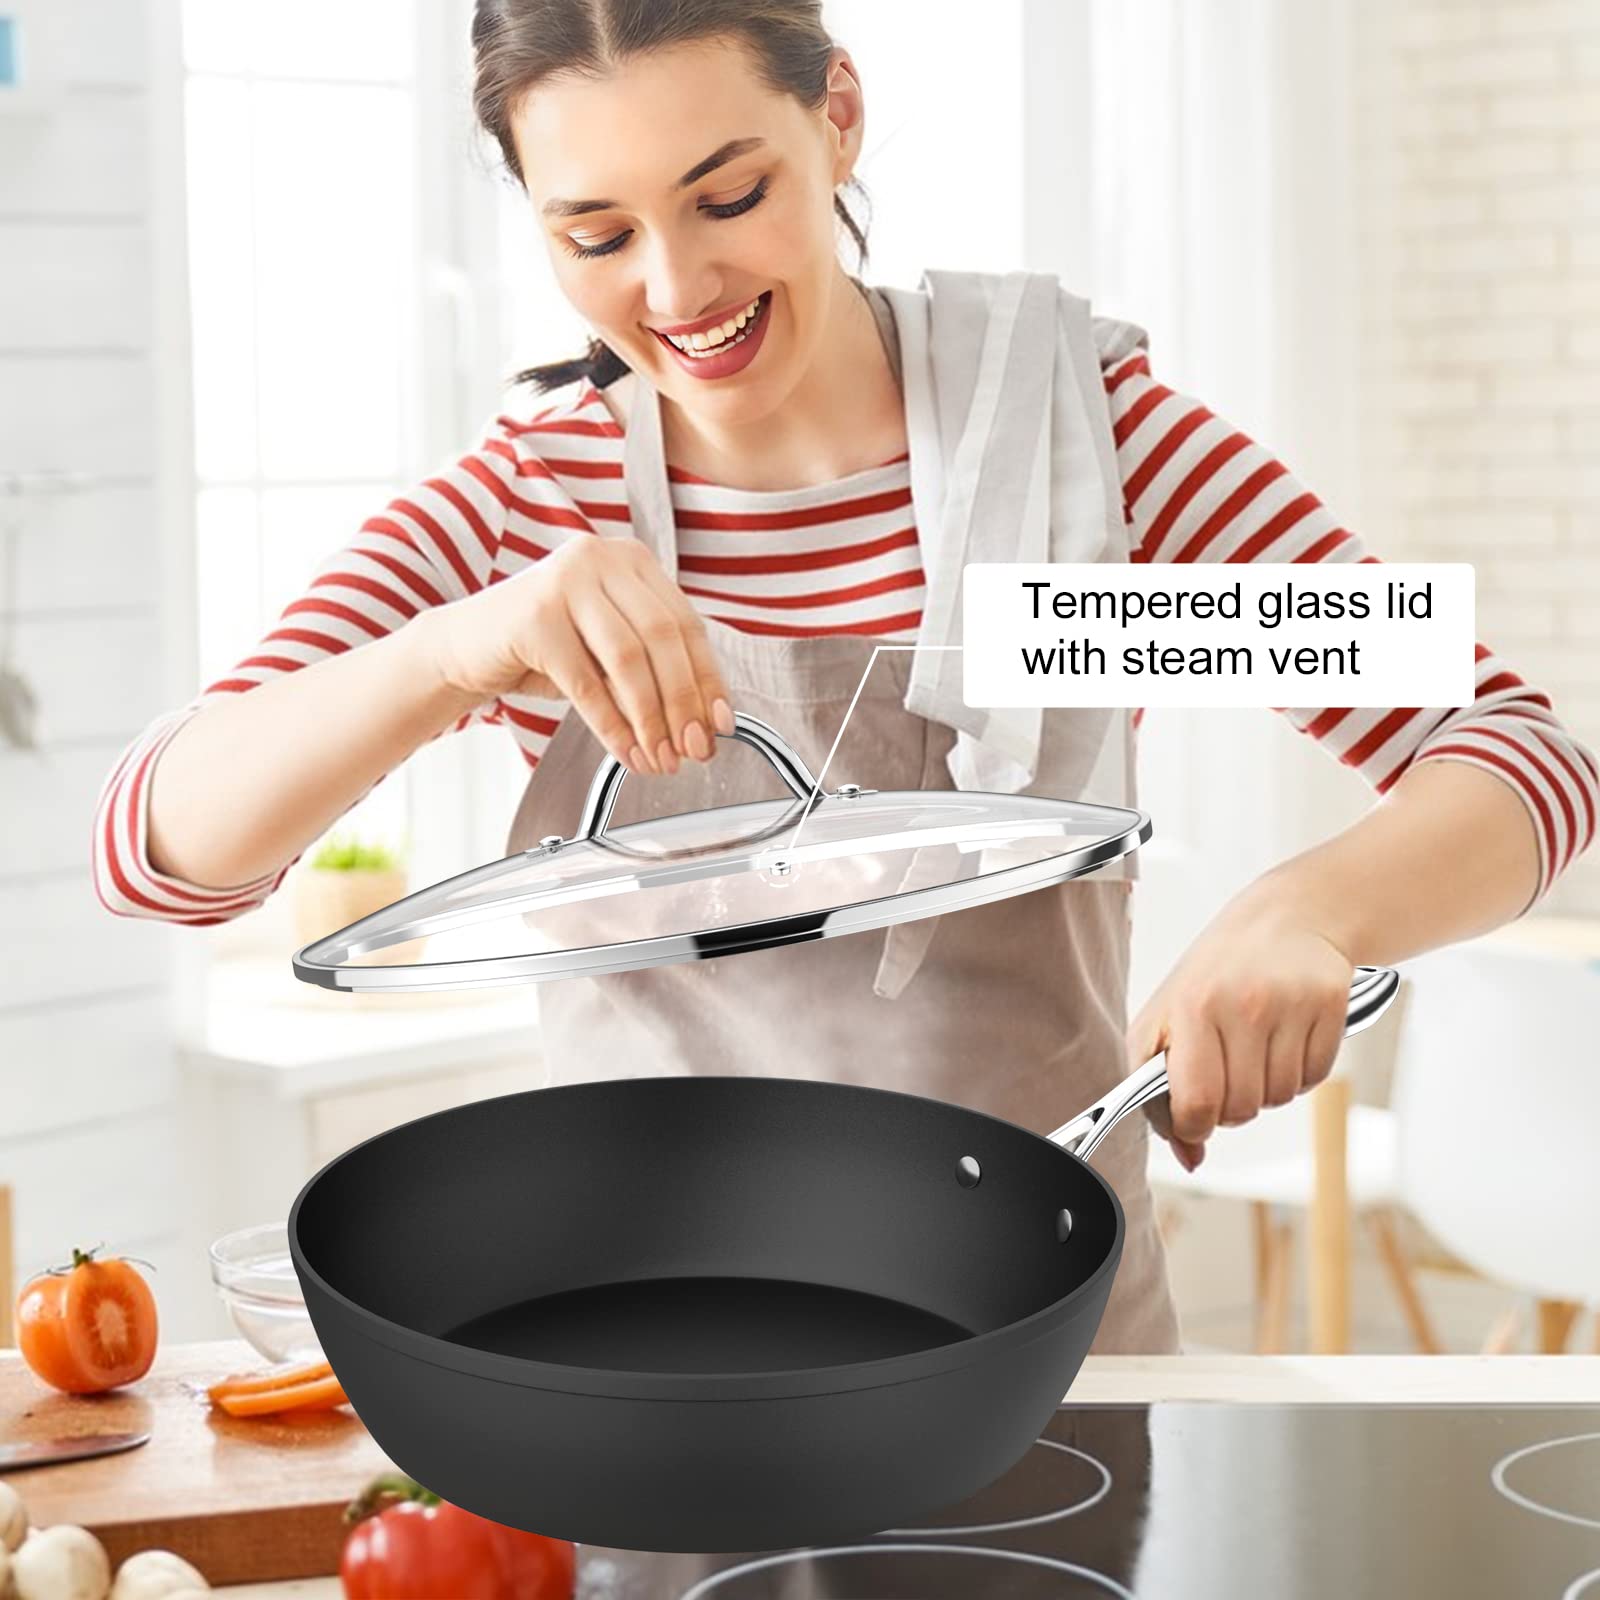 Faseem Frying Pans Nonstick with lid, Deep nonstick fry pan, Healthy non stick skillets for Cooking, Induction Compatible Non-Toxic PFOA & PFOS free (Black, 11 inch)